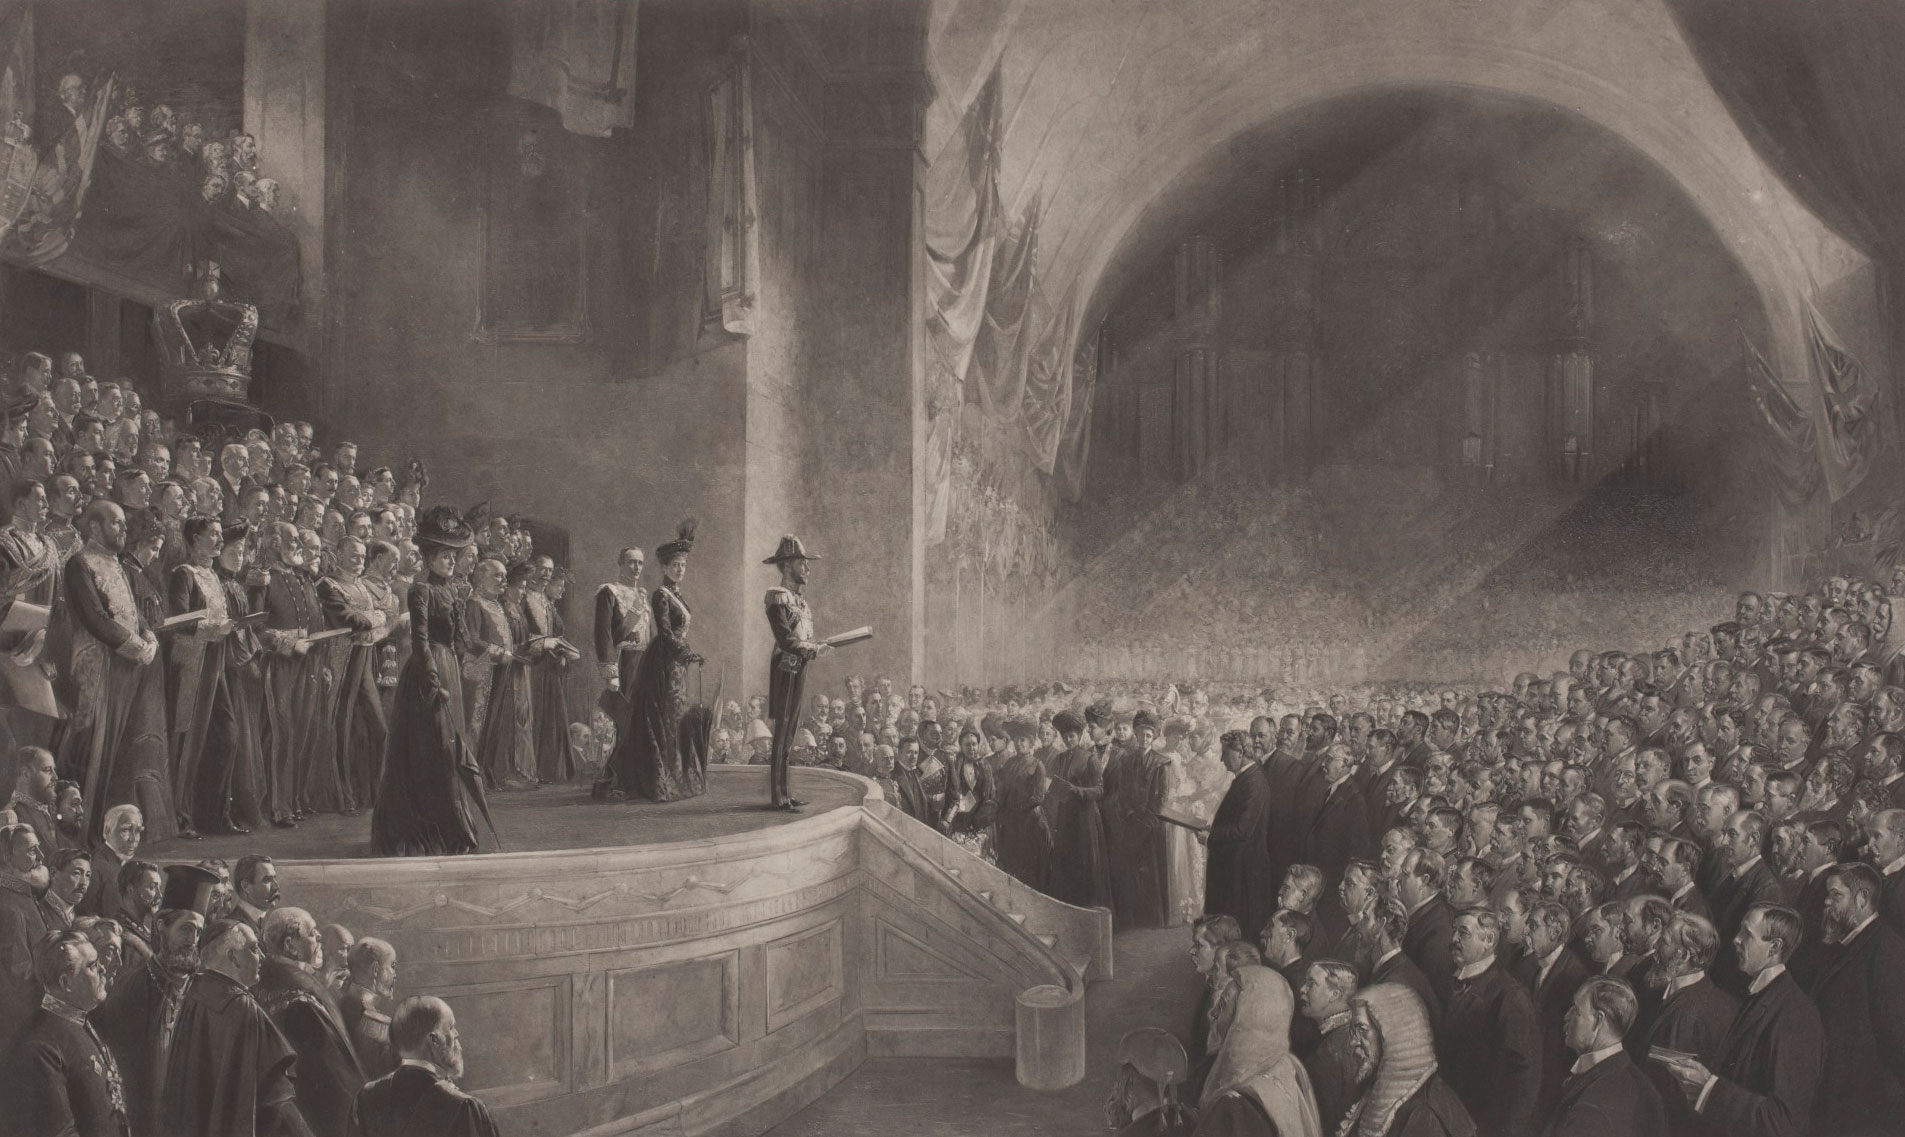 <p><em>Opening of the First Parliament of the Commonwealth of Australia by HRH The Duke of Cornwall and York (Later HM King George V), May 9, 1901, </em>by Tom Roberts</p>
